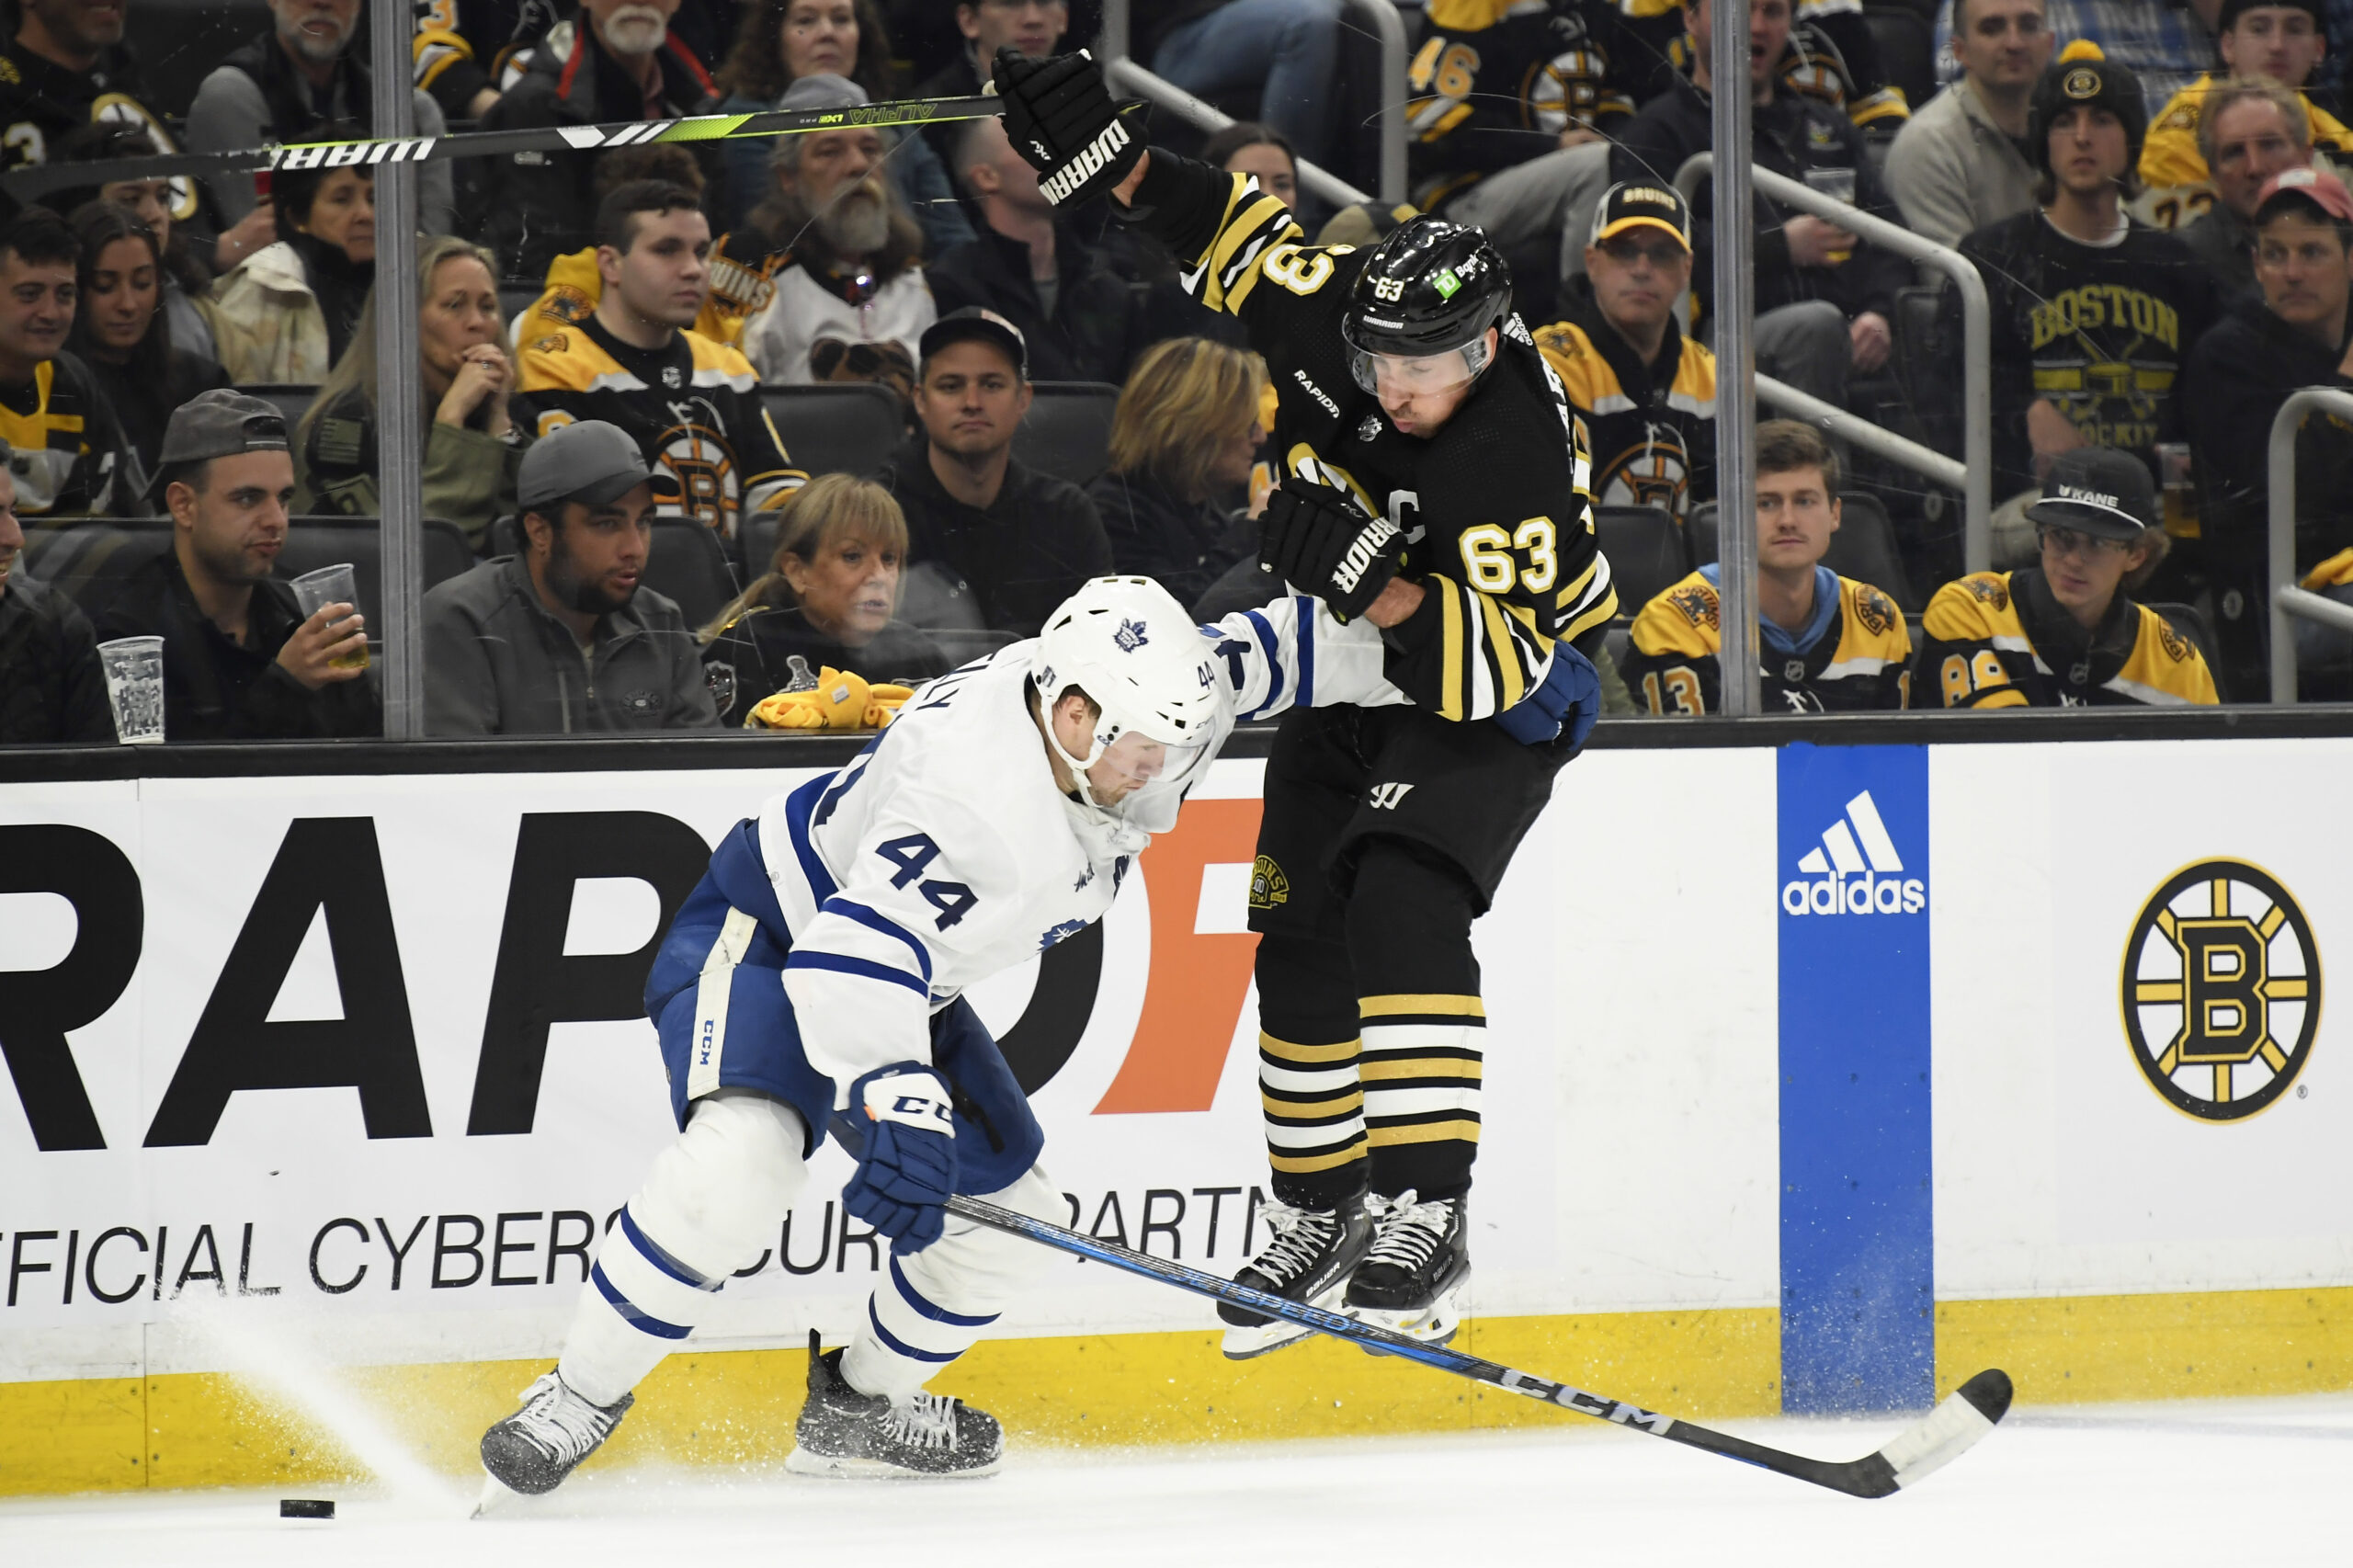 Prior to Game 4, the Toronto Maple Leafs and Boston Bruins Mid-Series First Round Playoff Review